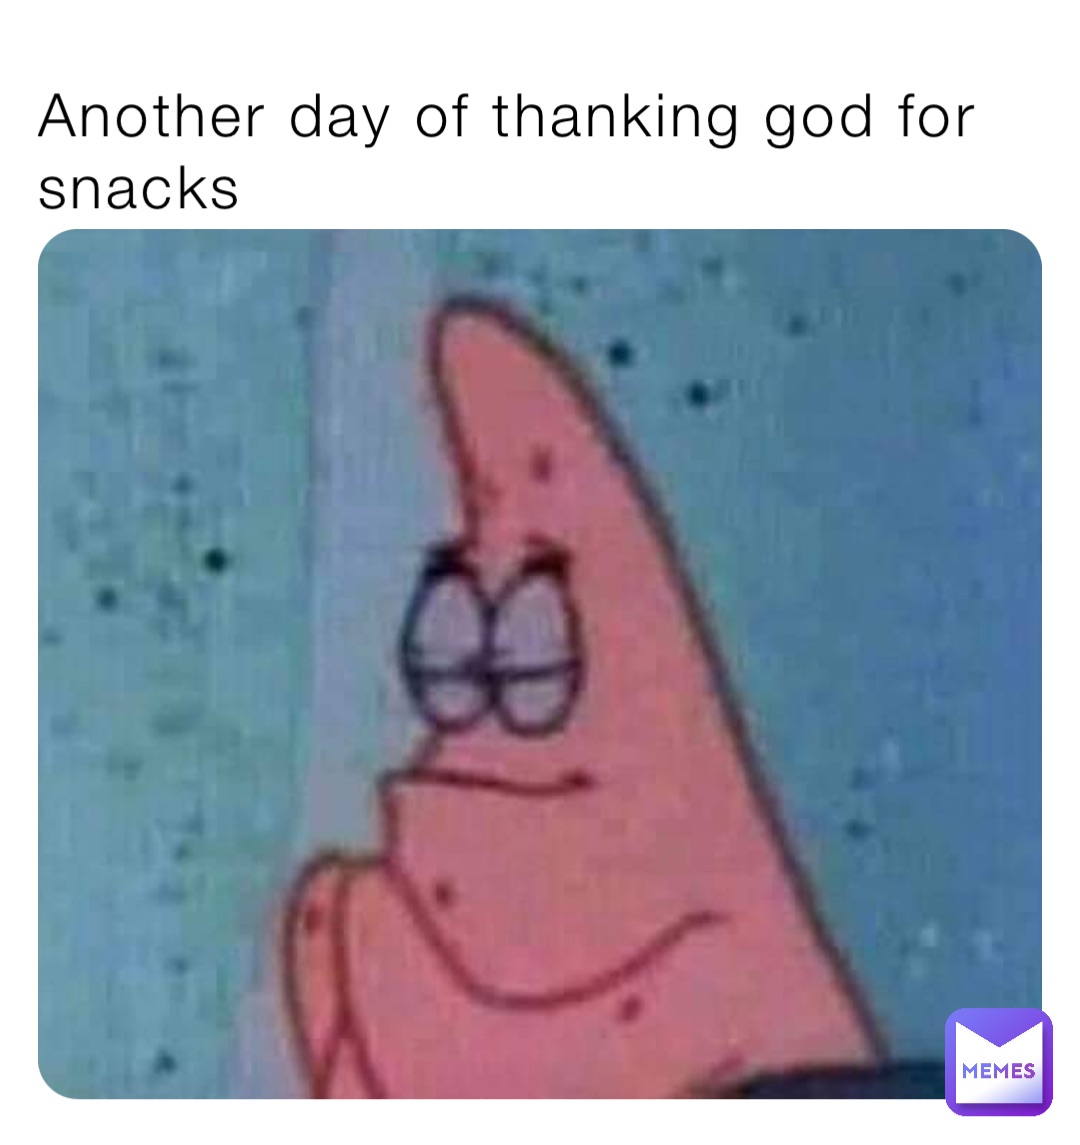 Another day of thanking god for snacks